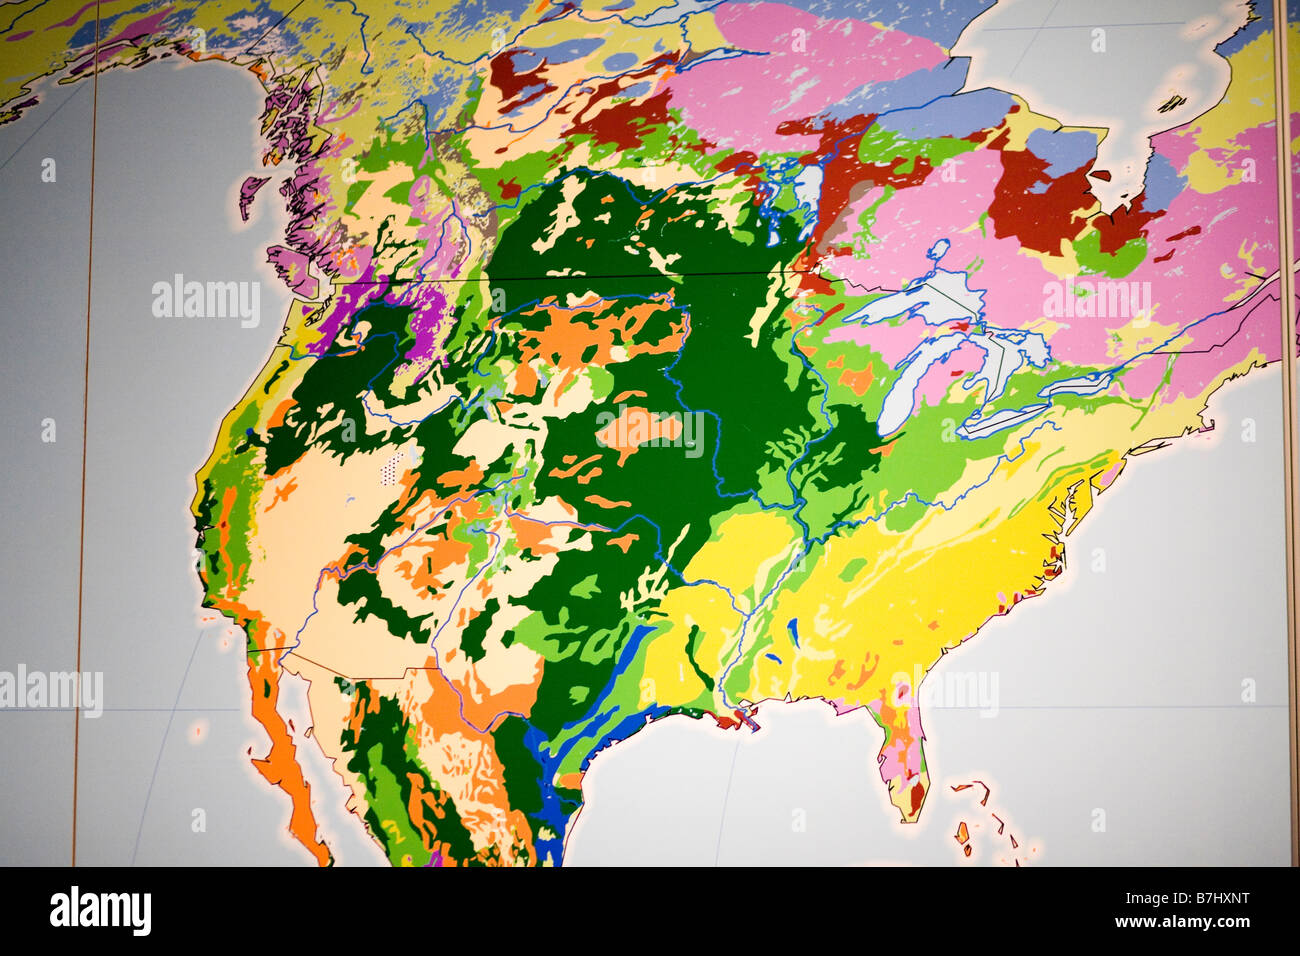 Soil map of North America Stock Photo